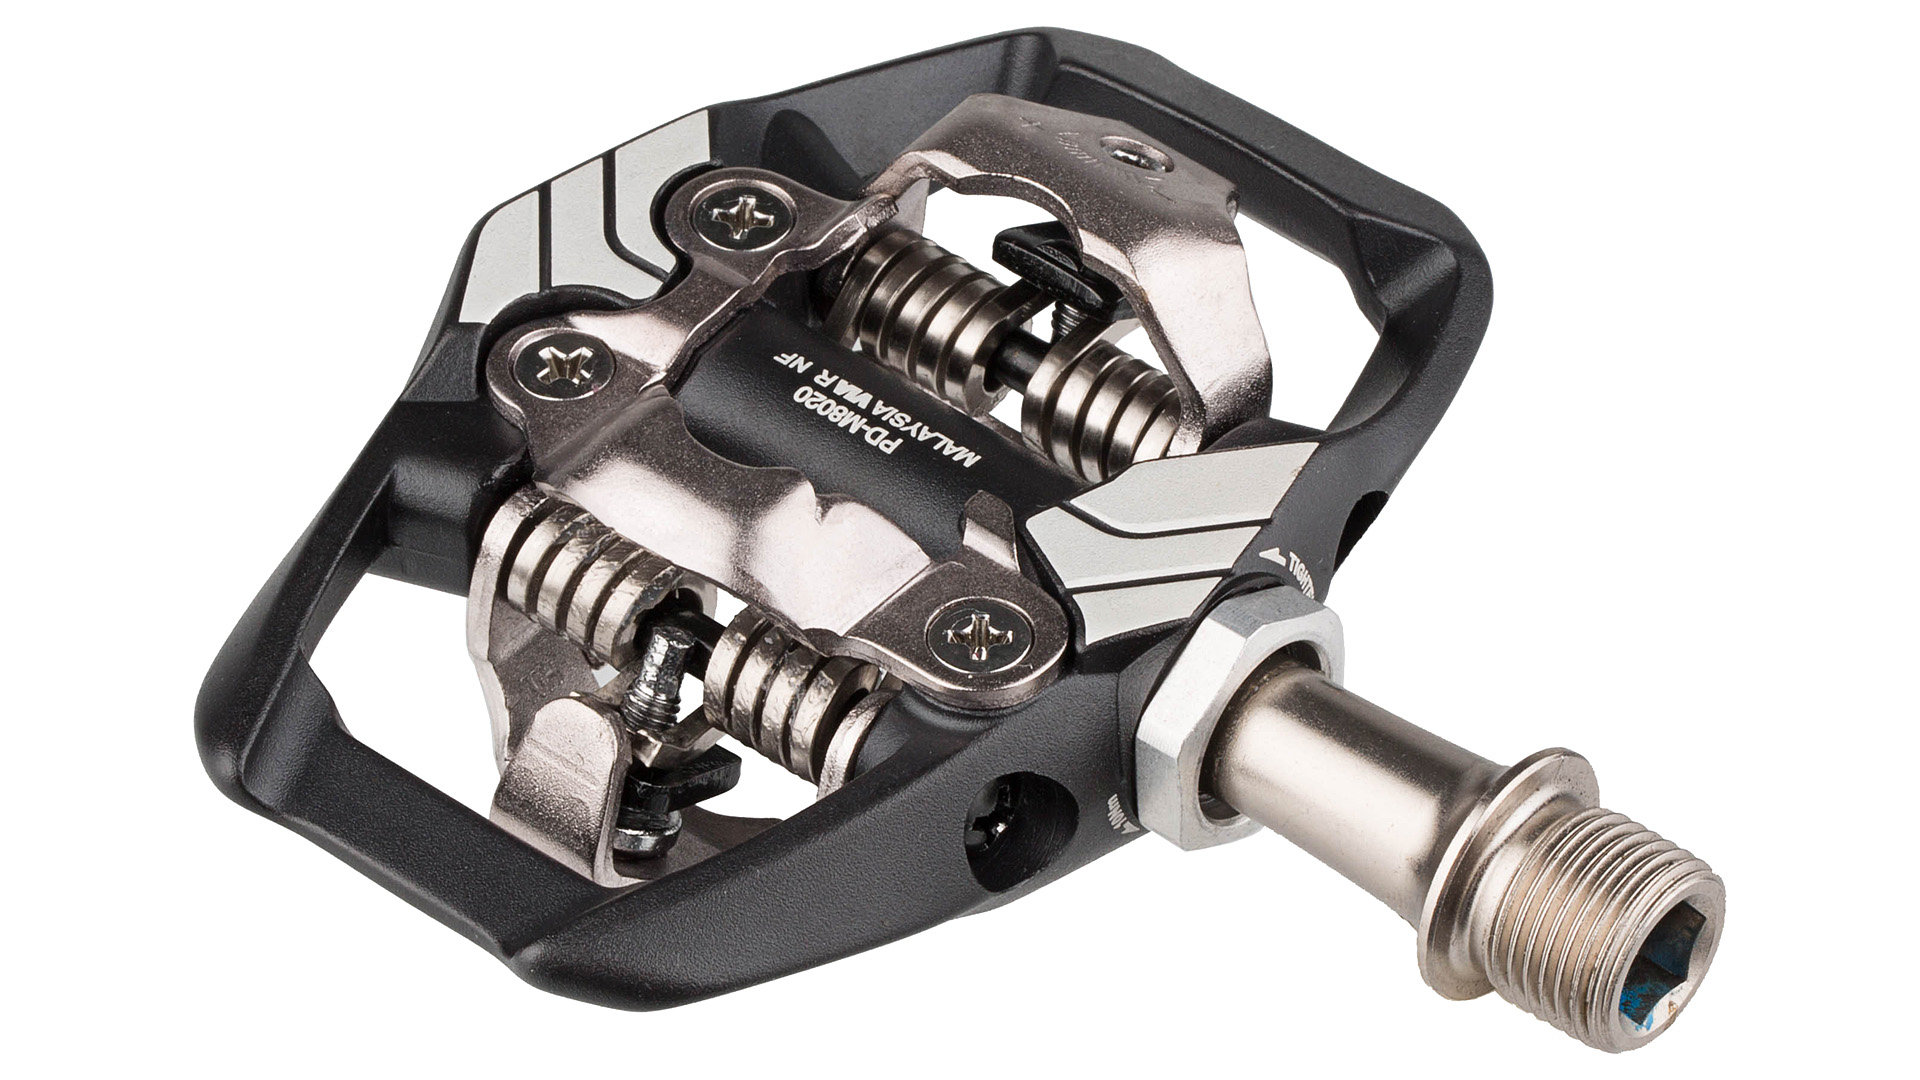 Shimano DEORE XT pedales PD-M8020